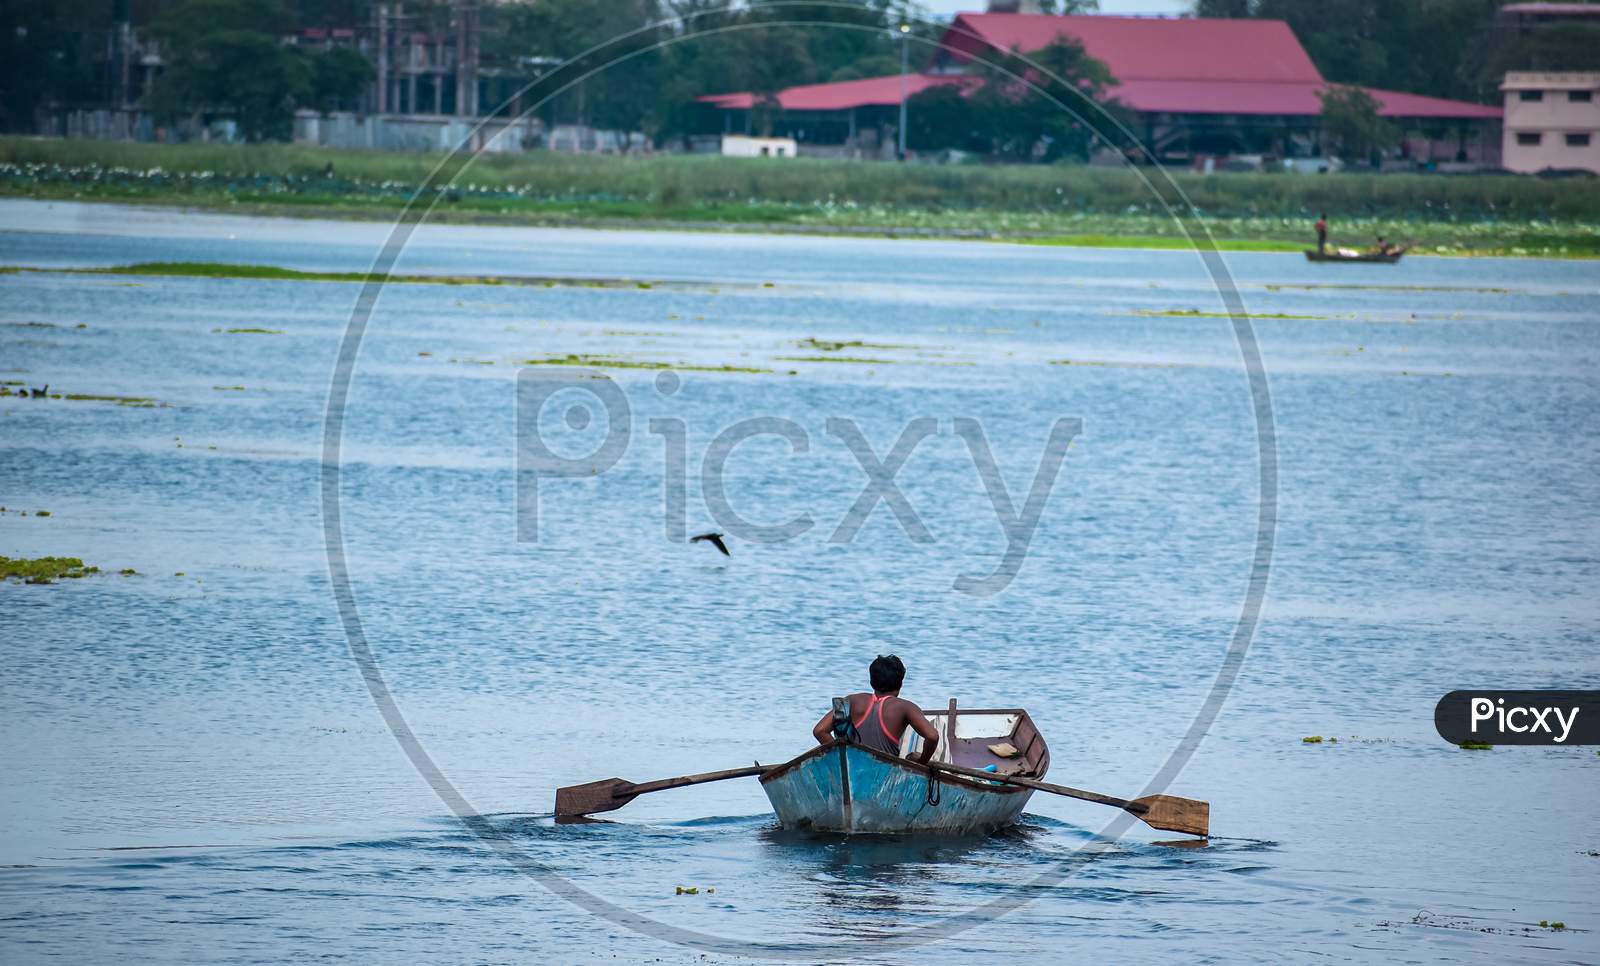 Image of A fisherman driving a boat in the pond filled with water -TW486392-Picxy